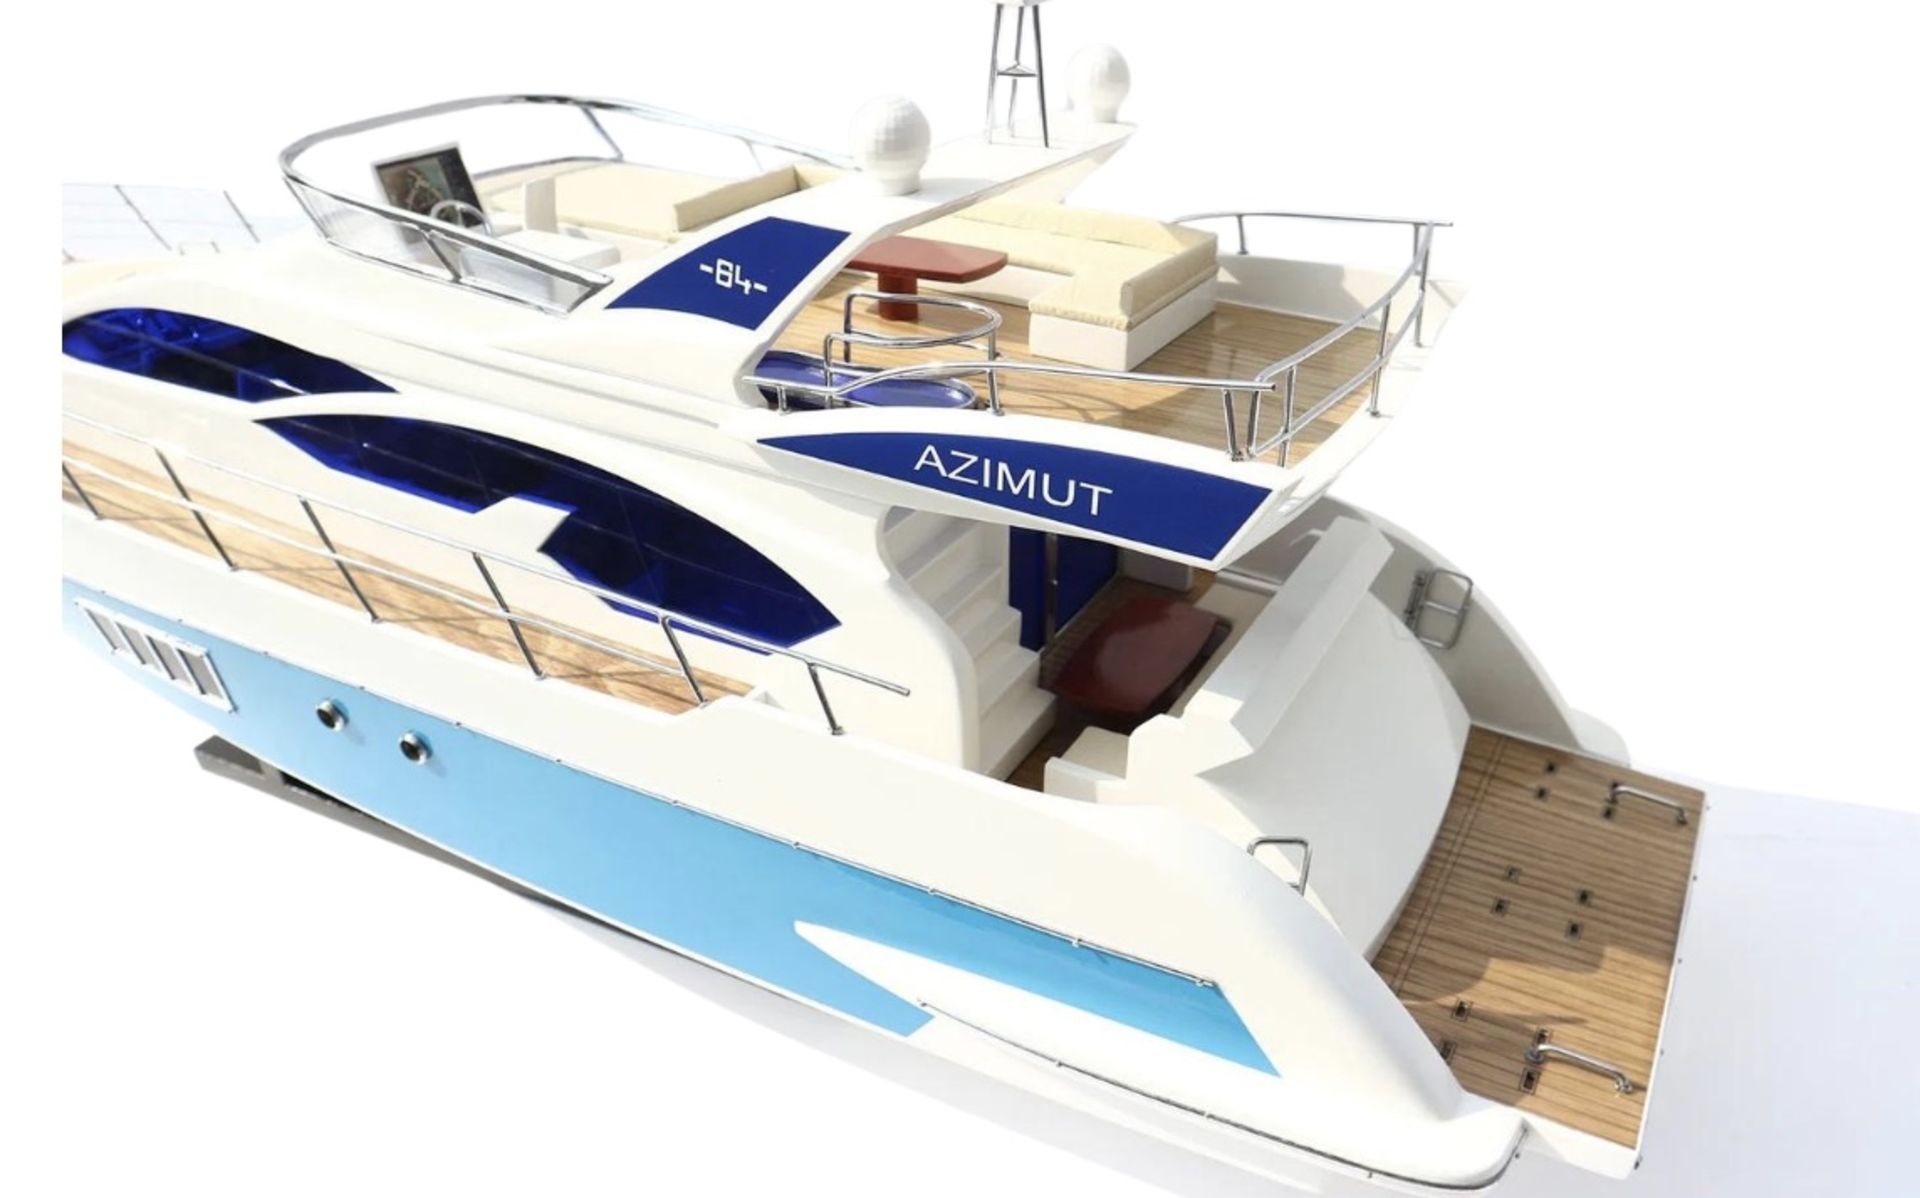 Azimut Yacht Wooden Scale Desk Display Model - Image 6 of 10